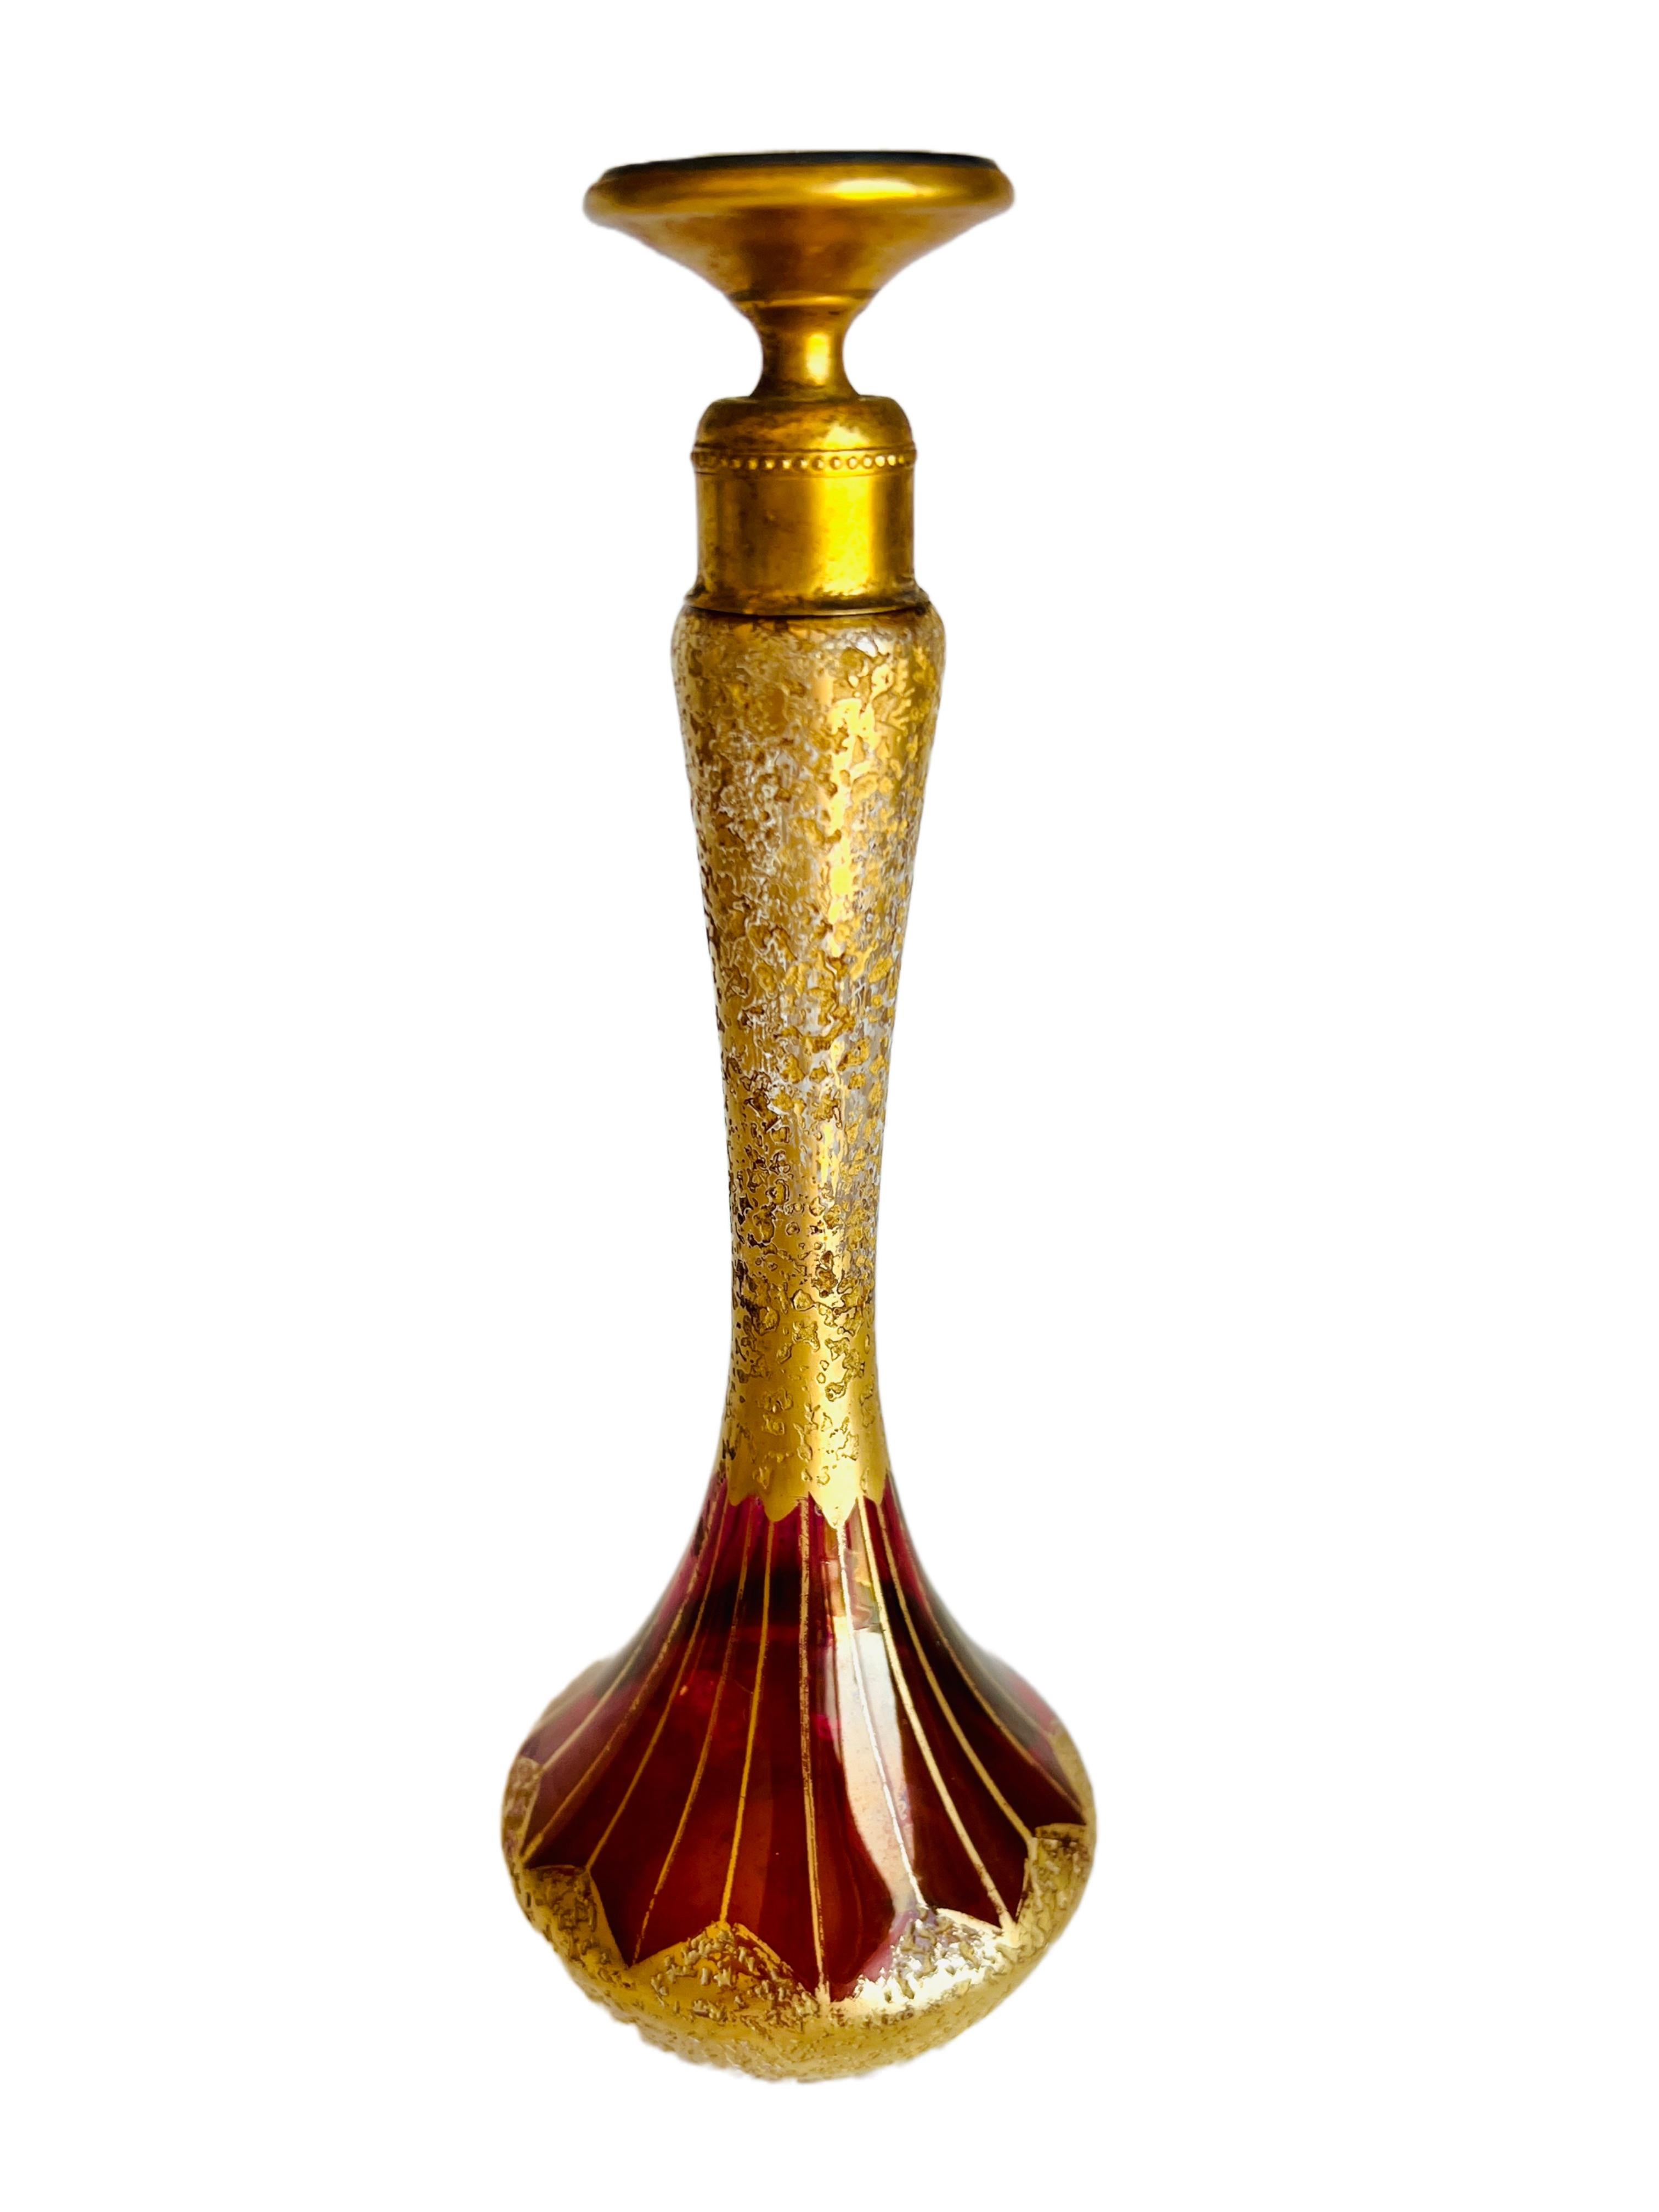 Elegant 1920s DeVilbiss red and gold encrusted perfume bottle. 

Size: 6-7/8